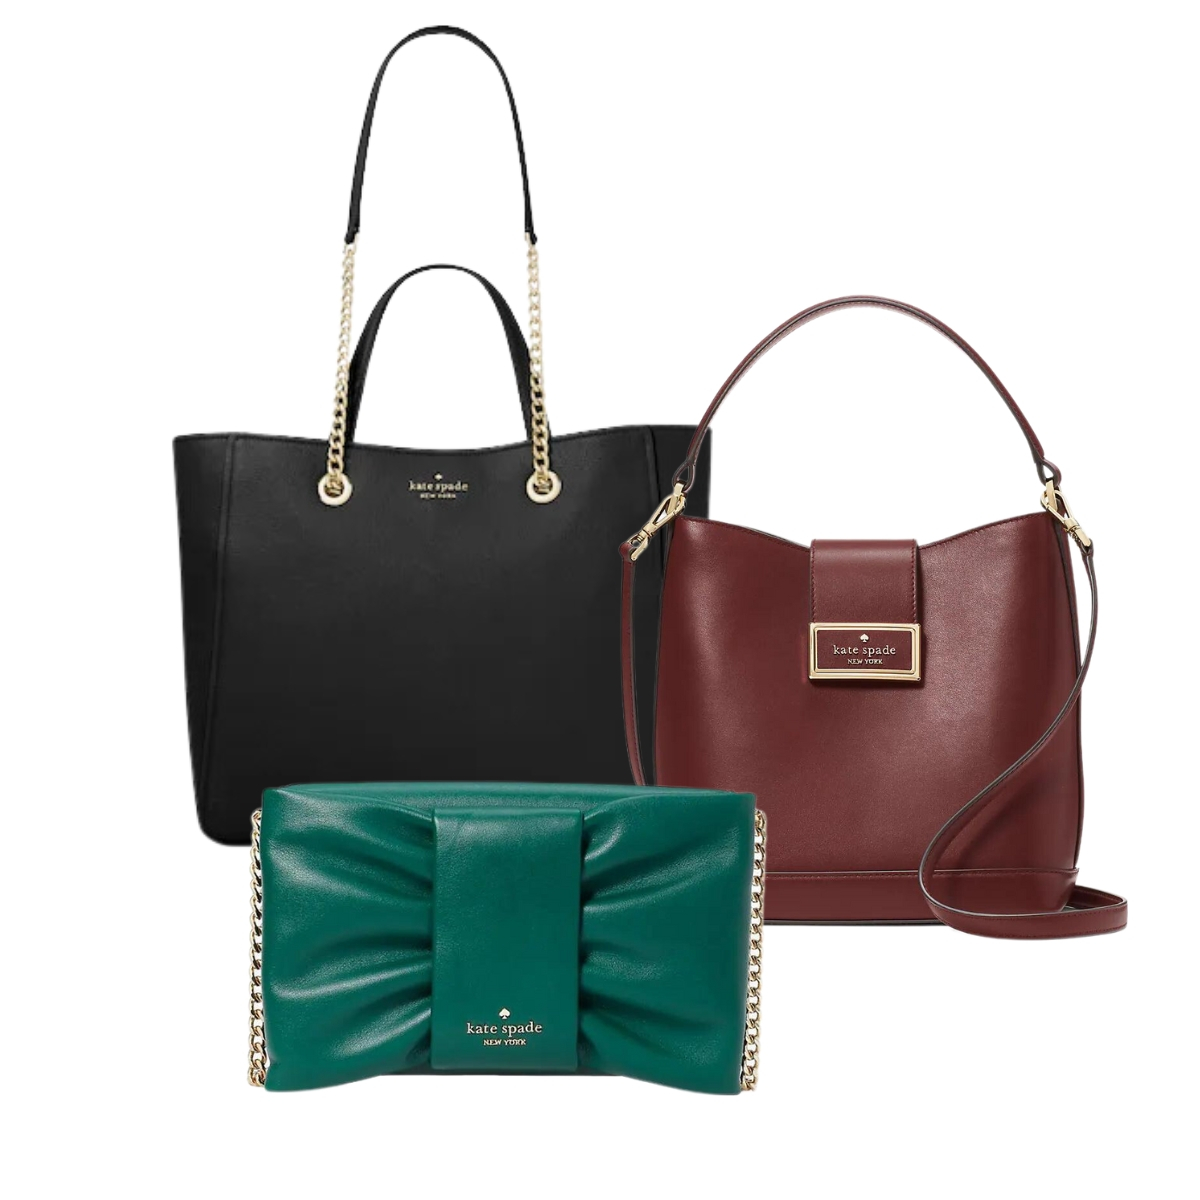 Deal Alert: Kate Spade Is Offering Up to 70% Off on Bags & More